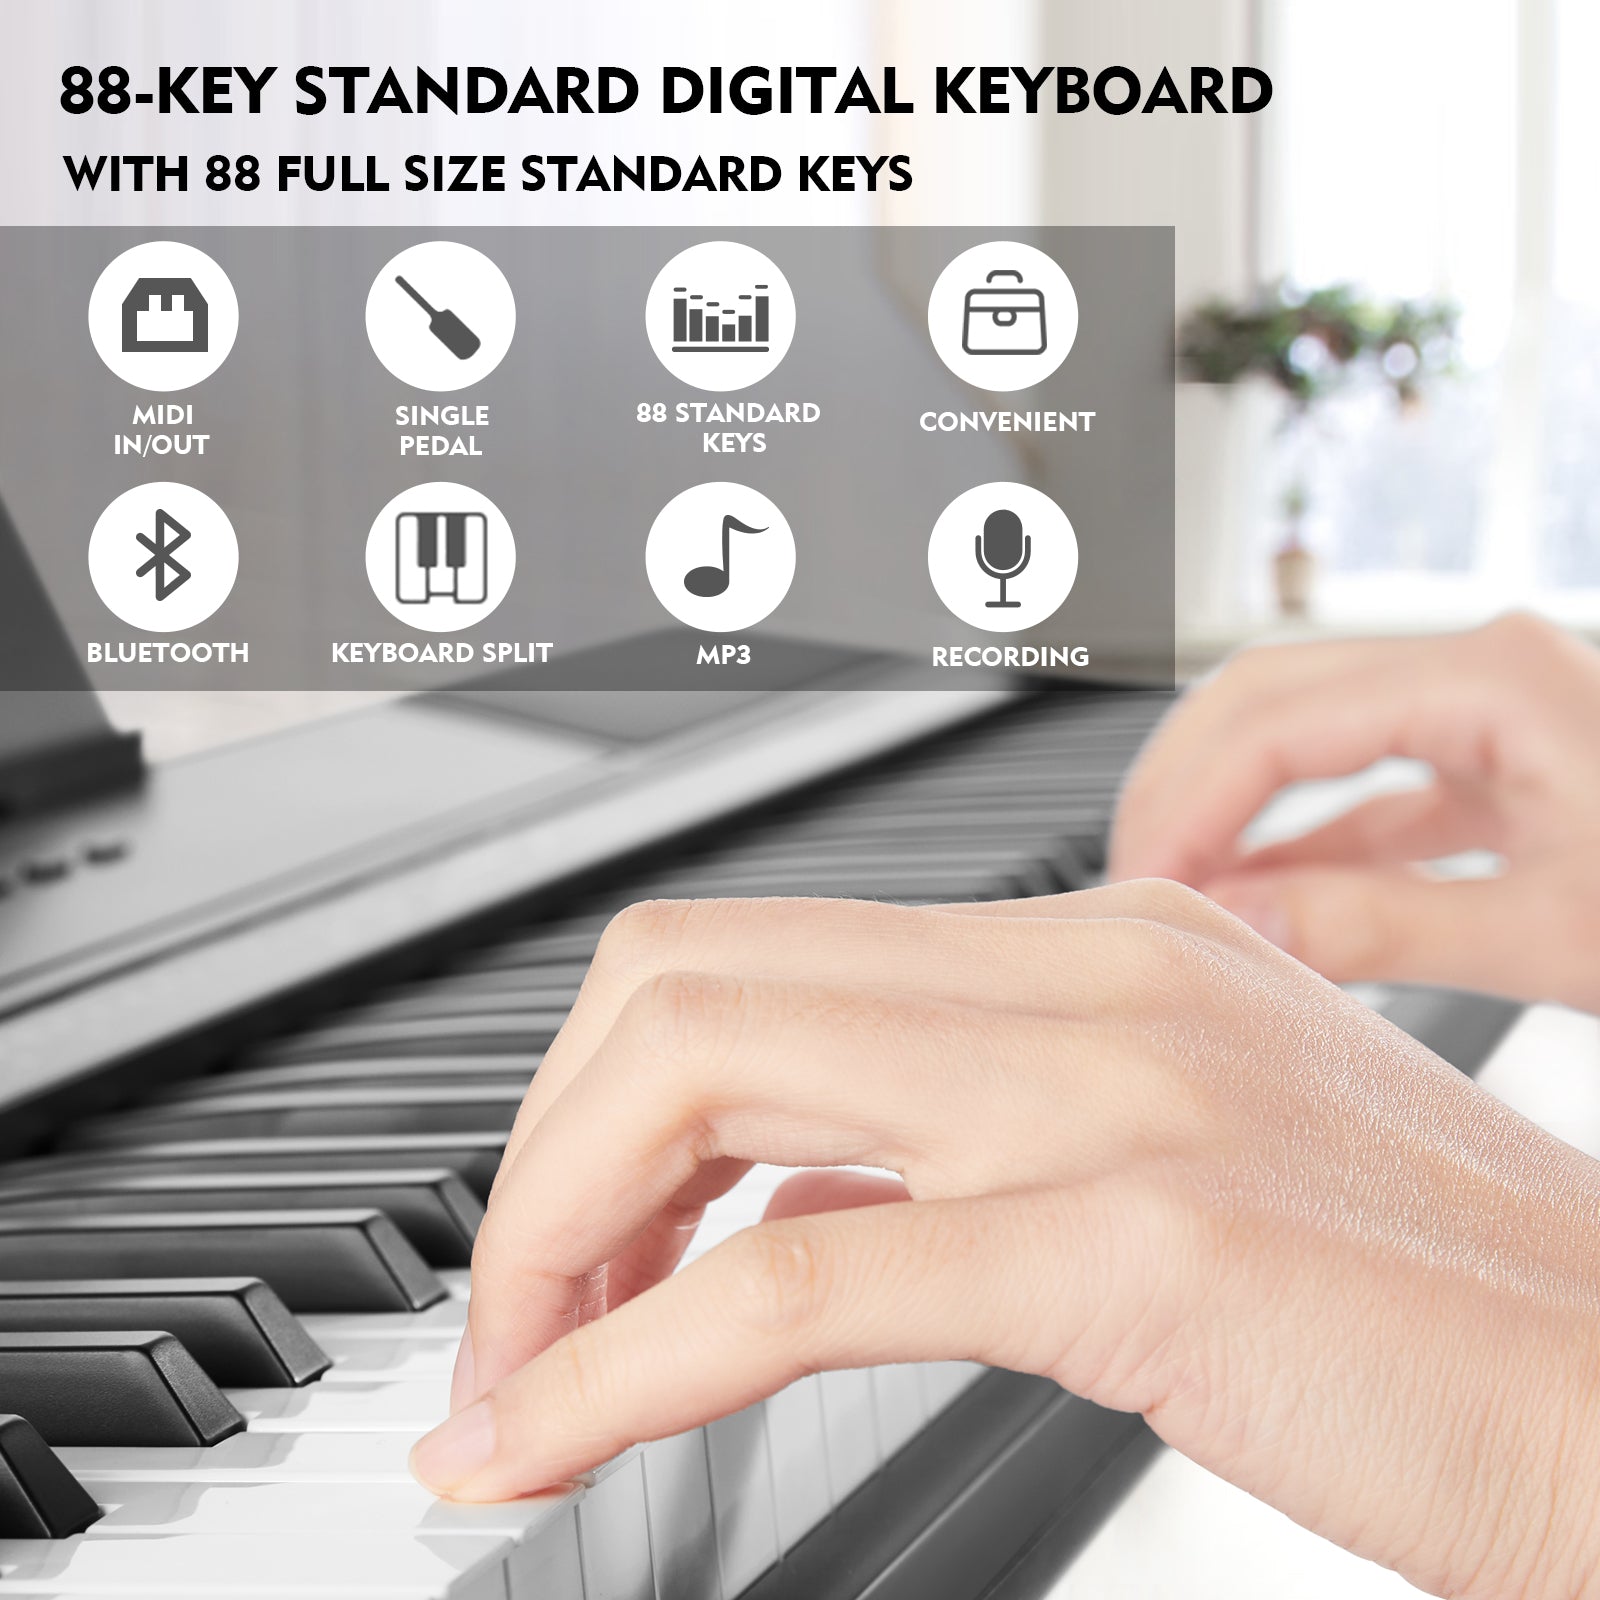 MUSTAR MEP-1100, 88 keys Digital Piano, Semi Weighted Keyboard Piano, Electronic Keyboards for Beginners, Sustain Pedal, USB/MIDI/Bluetooth, ABS, 128 Rhythms, 2 built-in 25W Stereo Speakers, Black